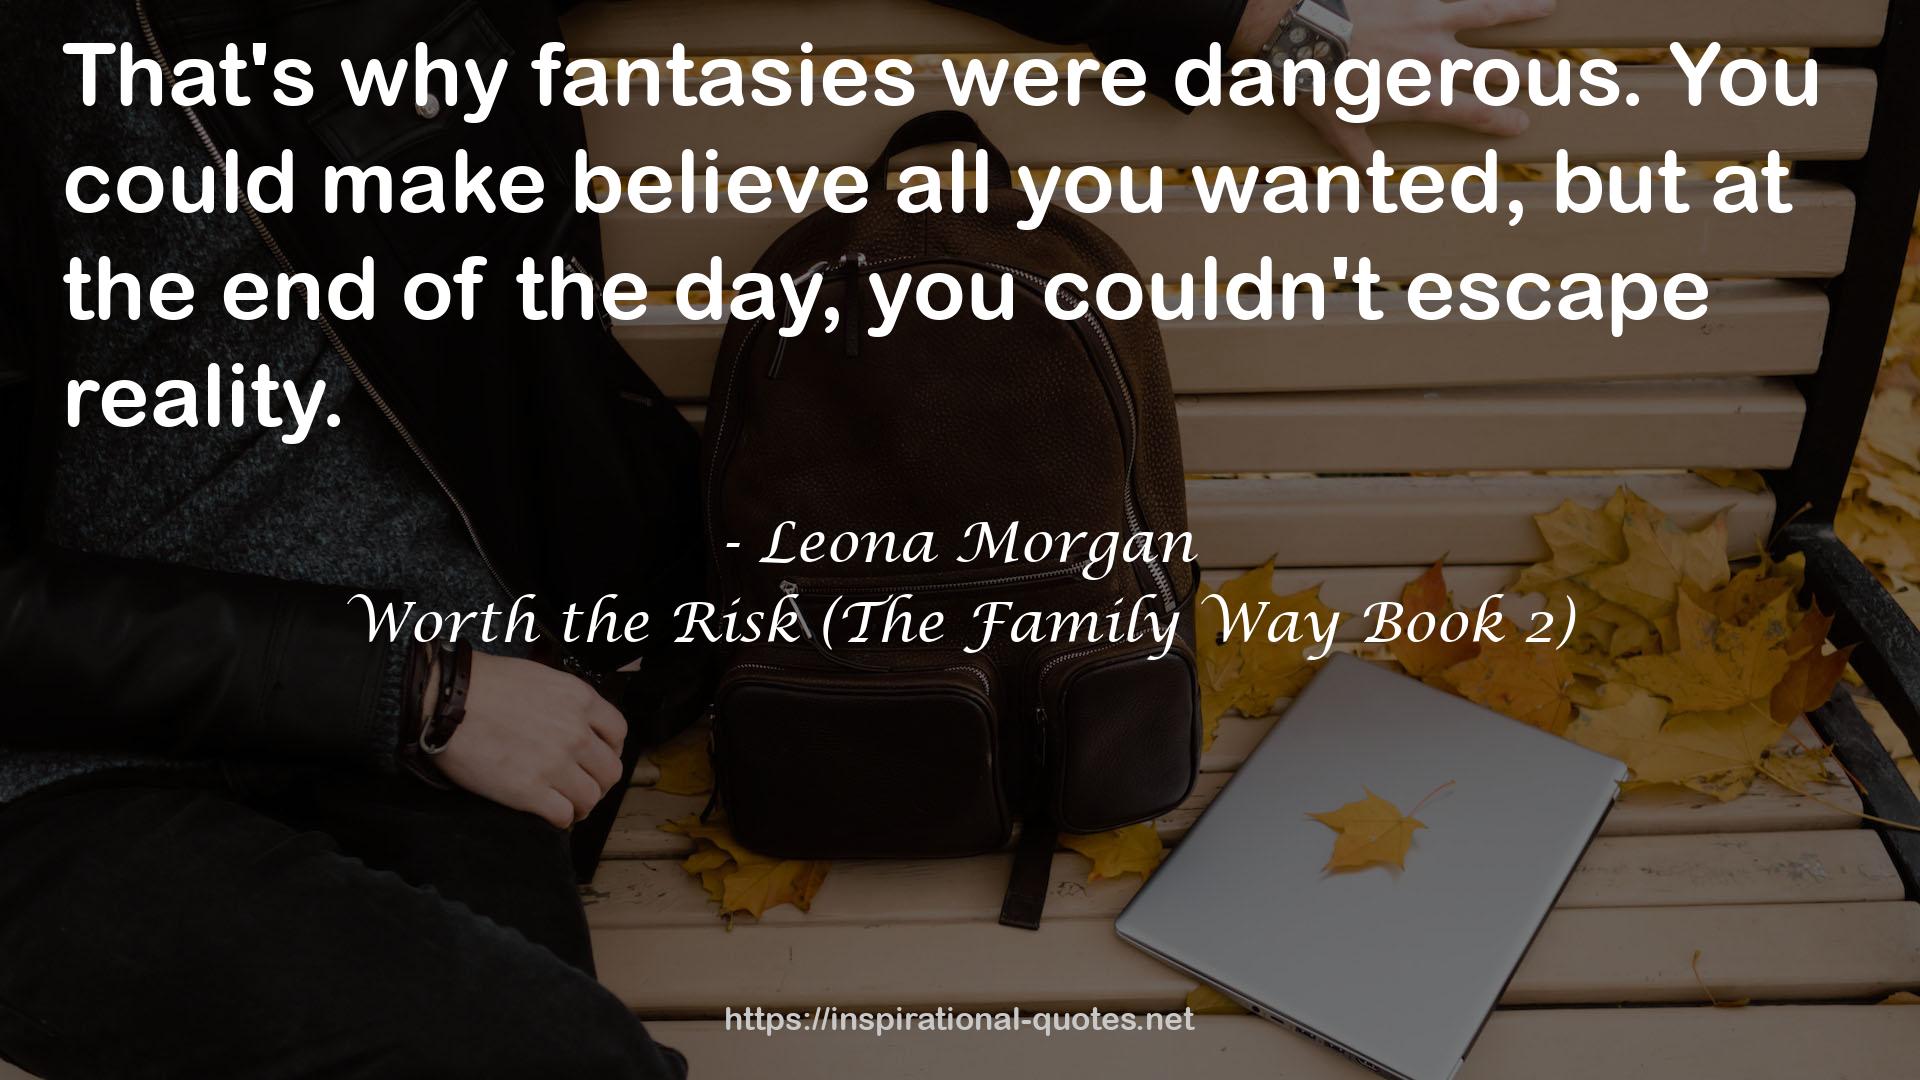 Worth the Risk (The Family Way Book 2) QUOTES